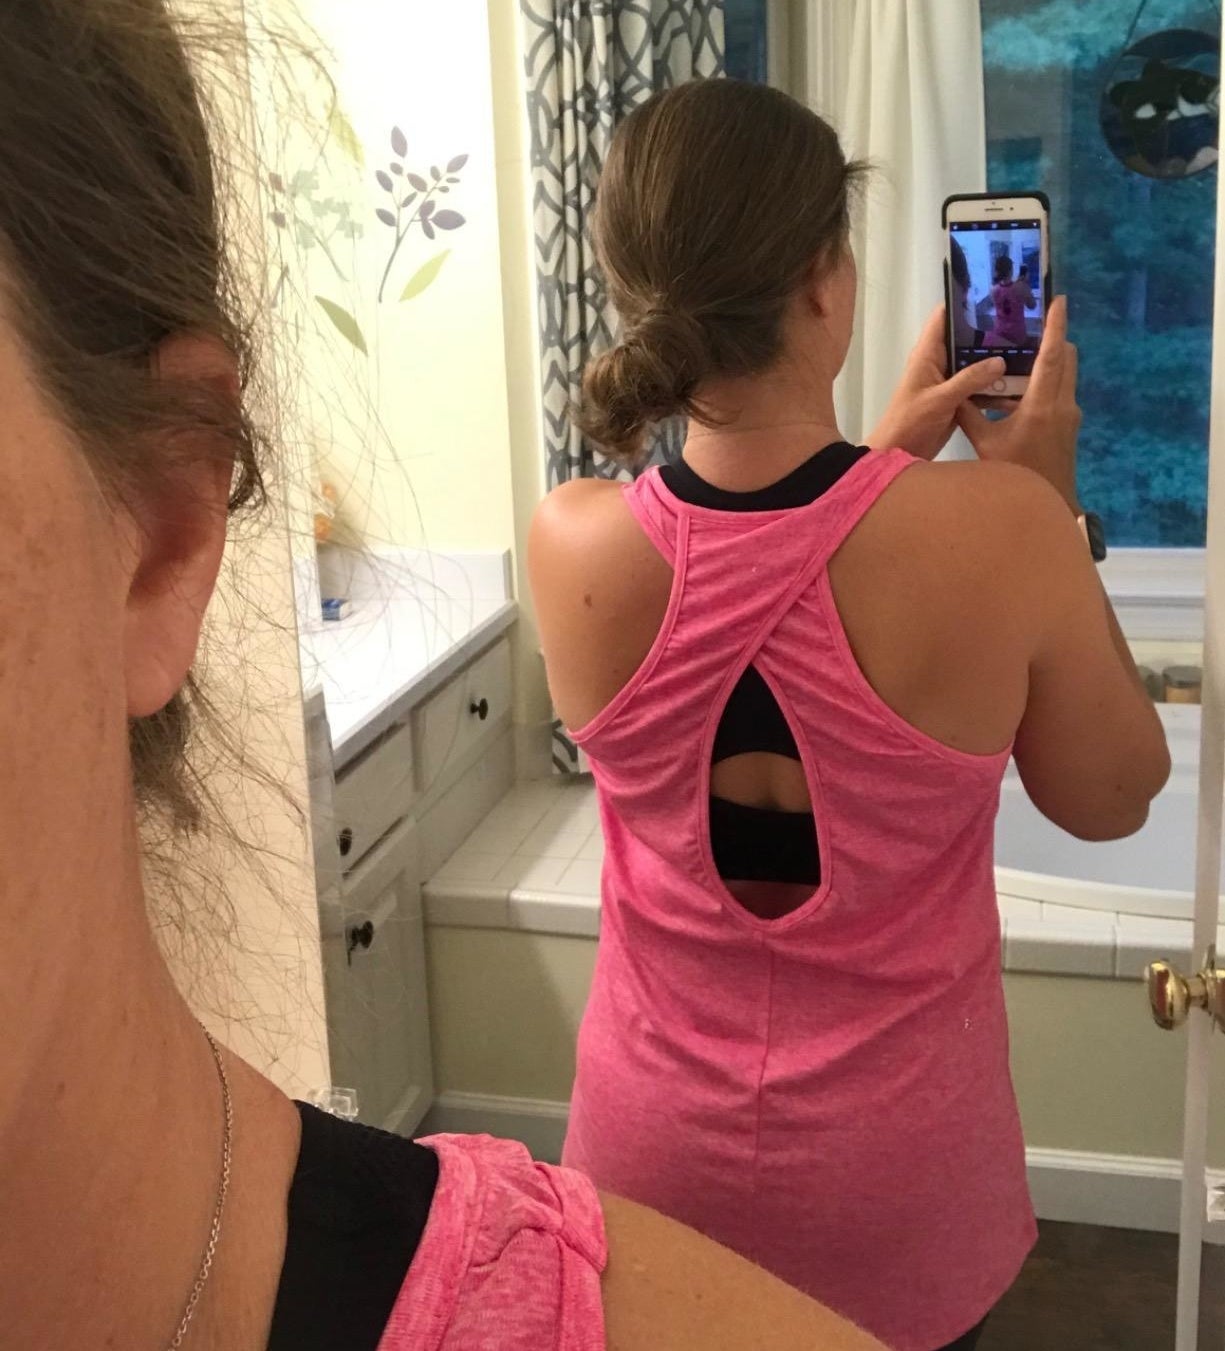 Reviewer is wearing a hot pink tank top with a criss cross peep hole back